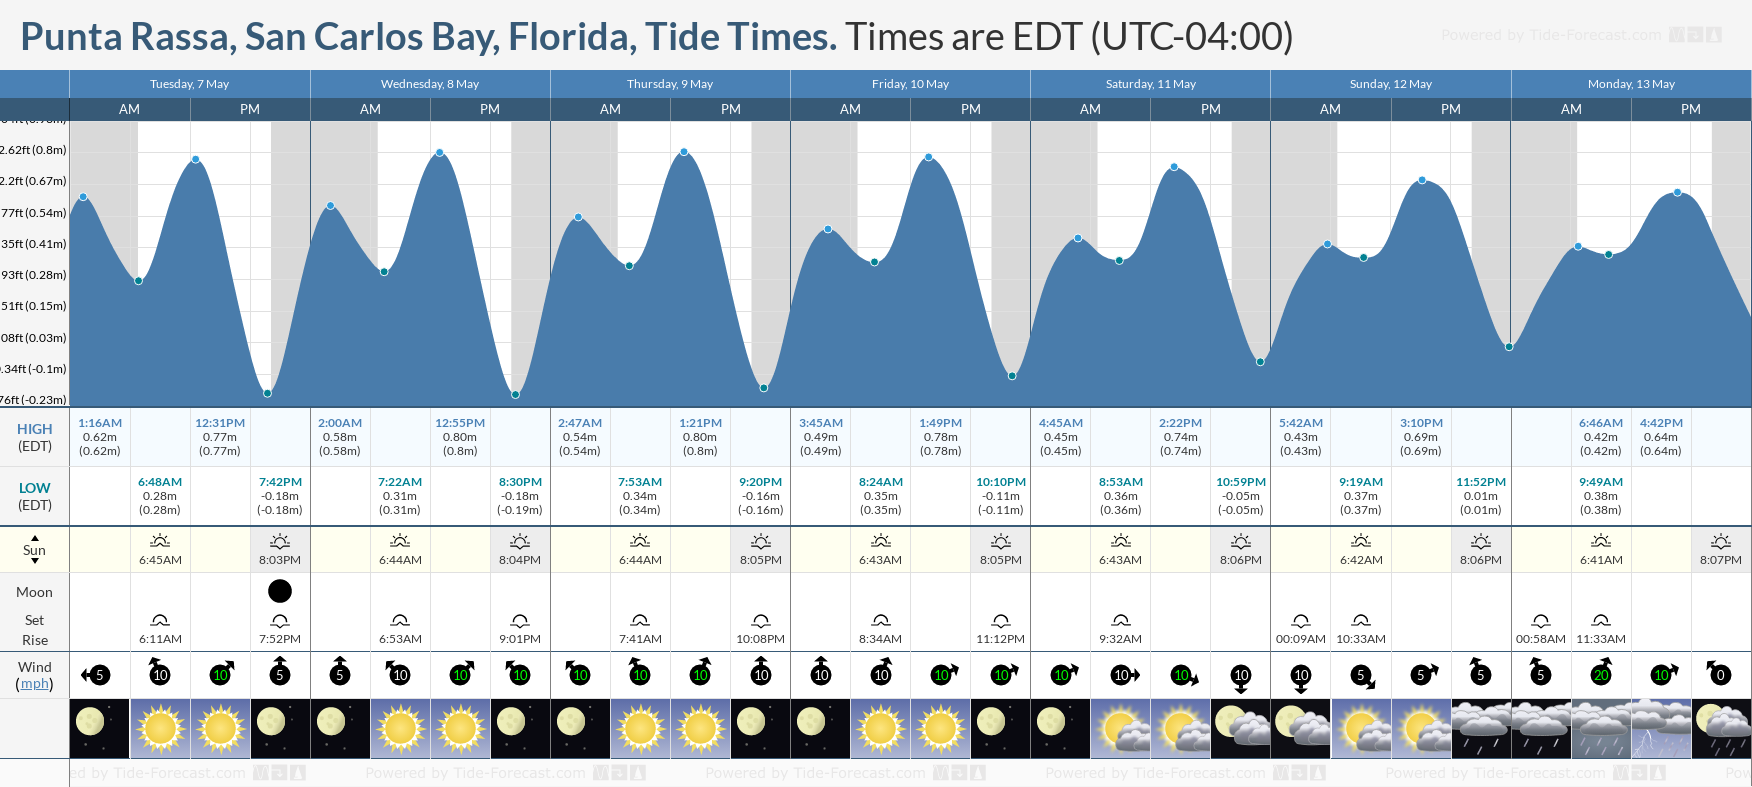 Punta Rassa, San Carlos Bay, Florida Tide Chart including high and low tide tide times for the next 7 days